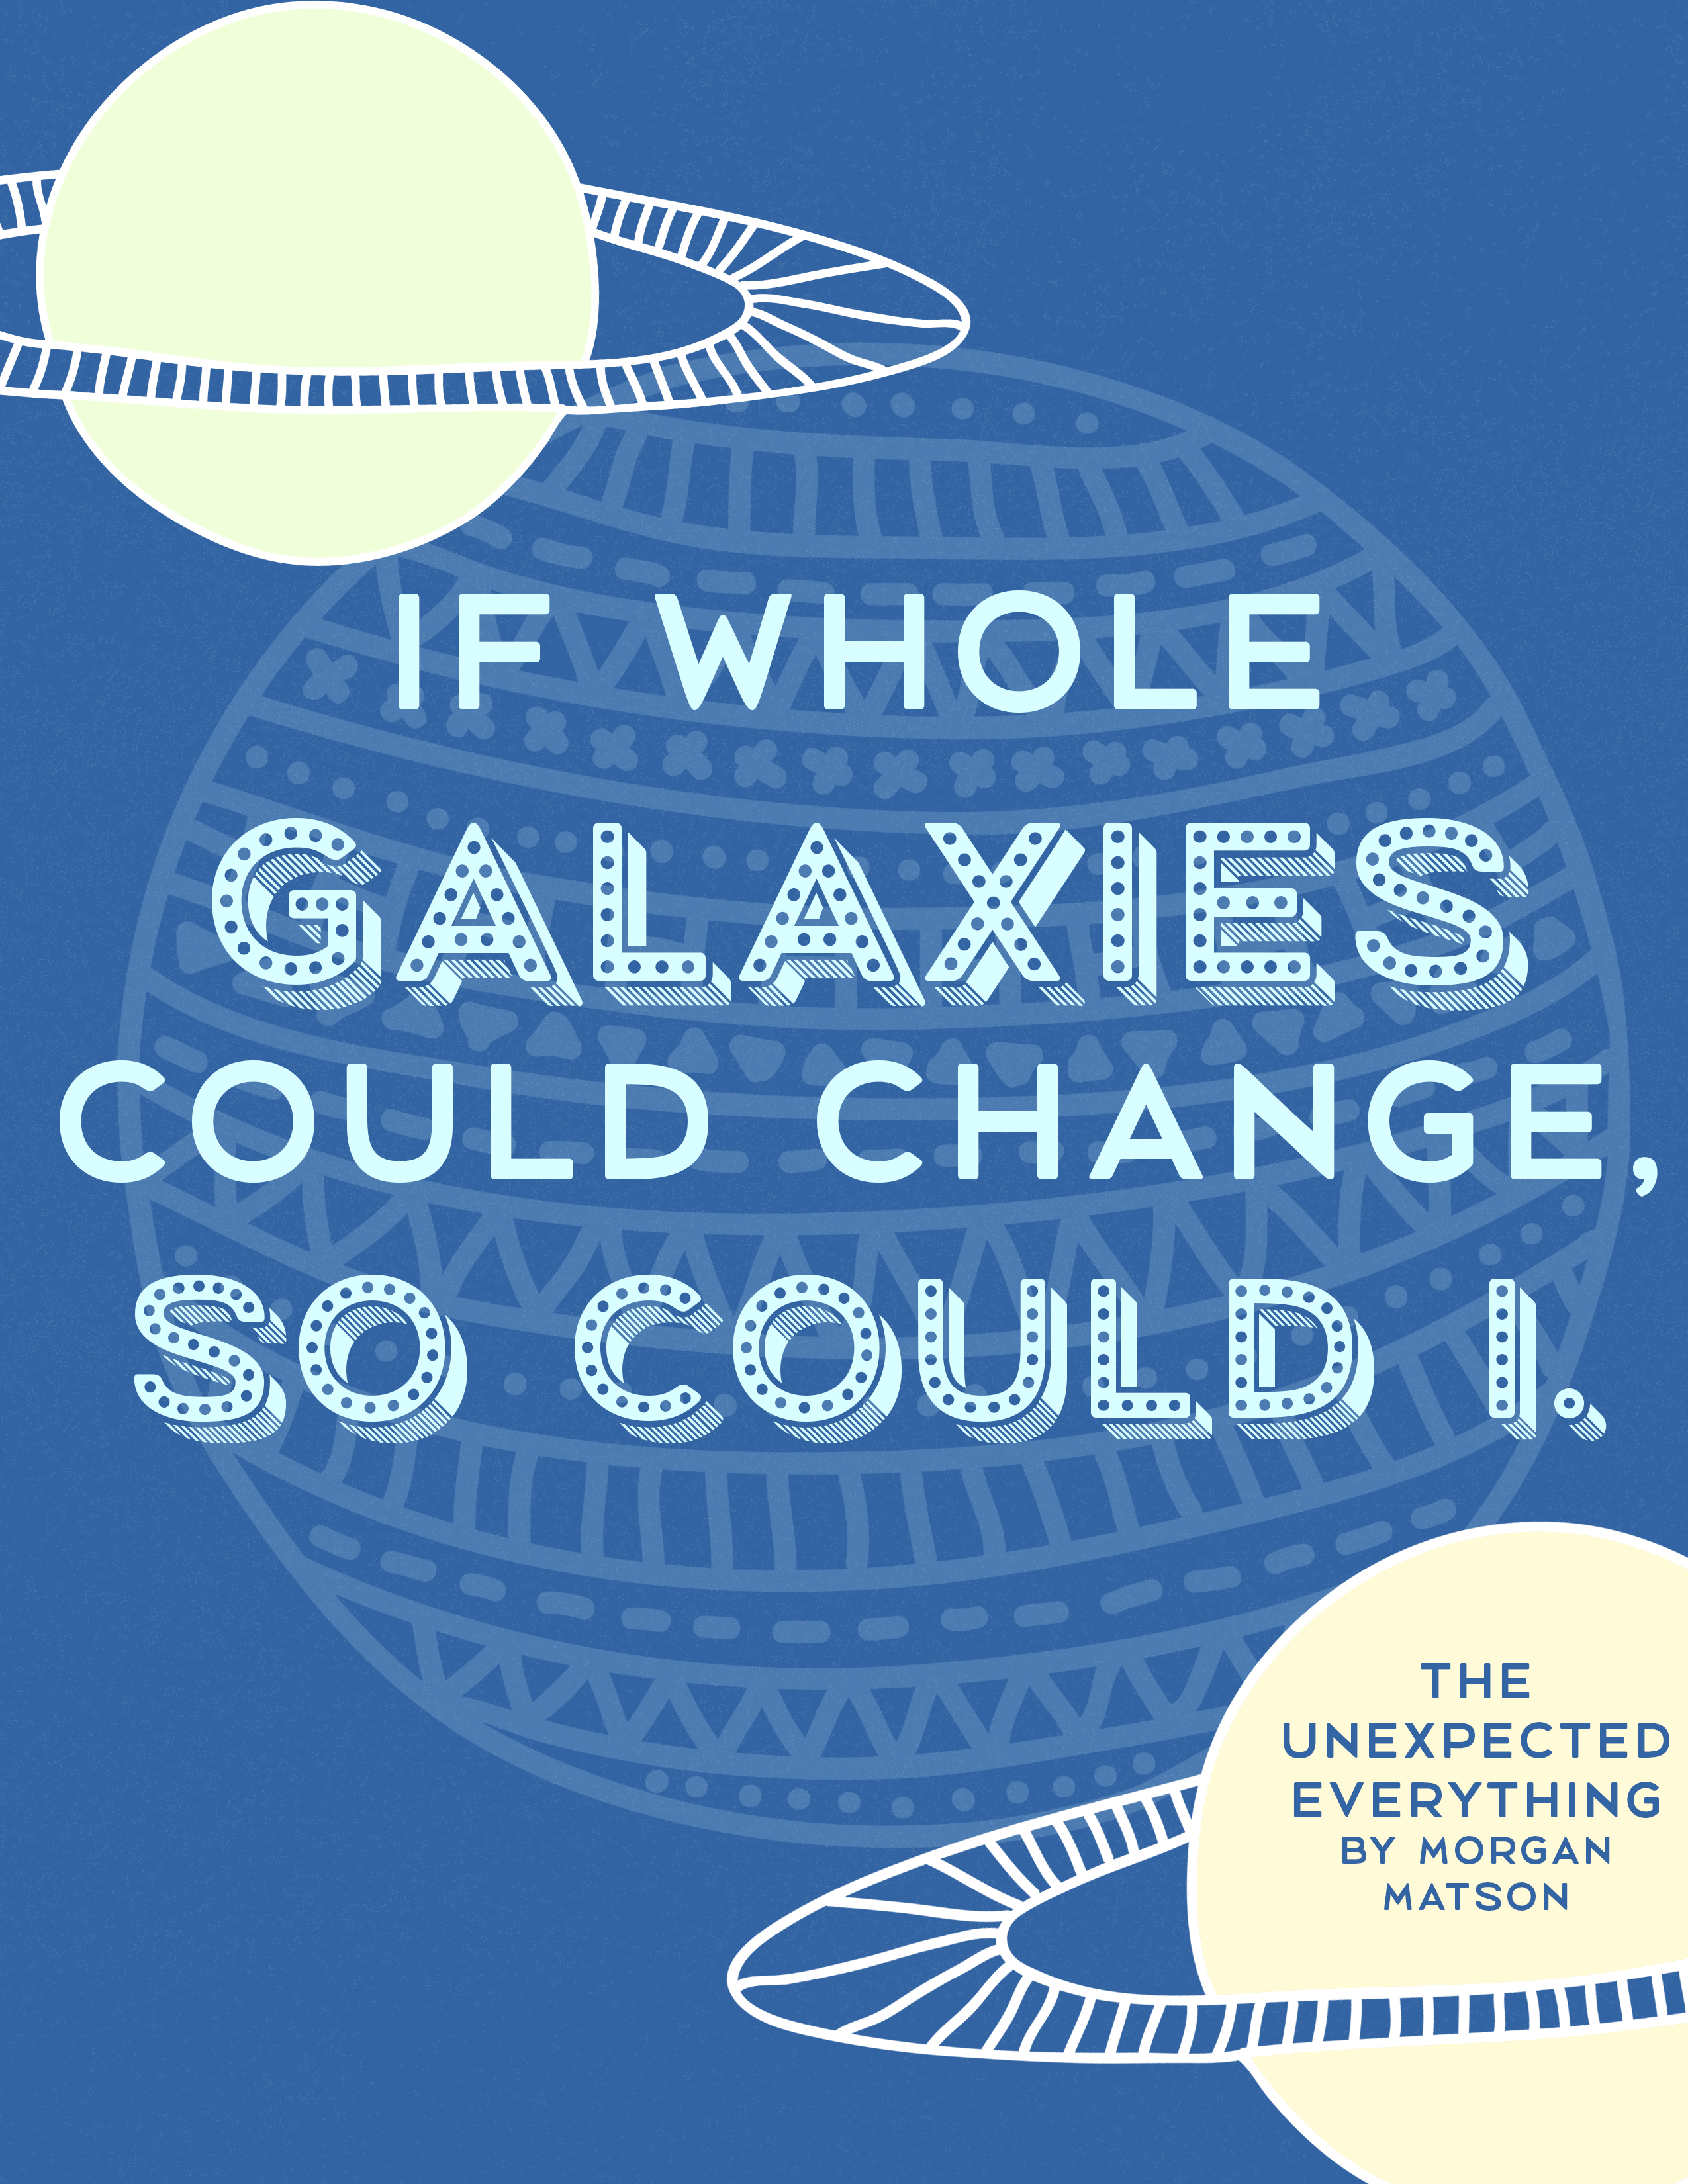 morgan-matson-quote-the-unexpected-everything-if-whole-galaxies-could-change